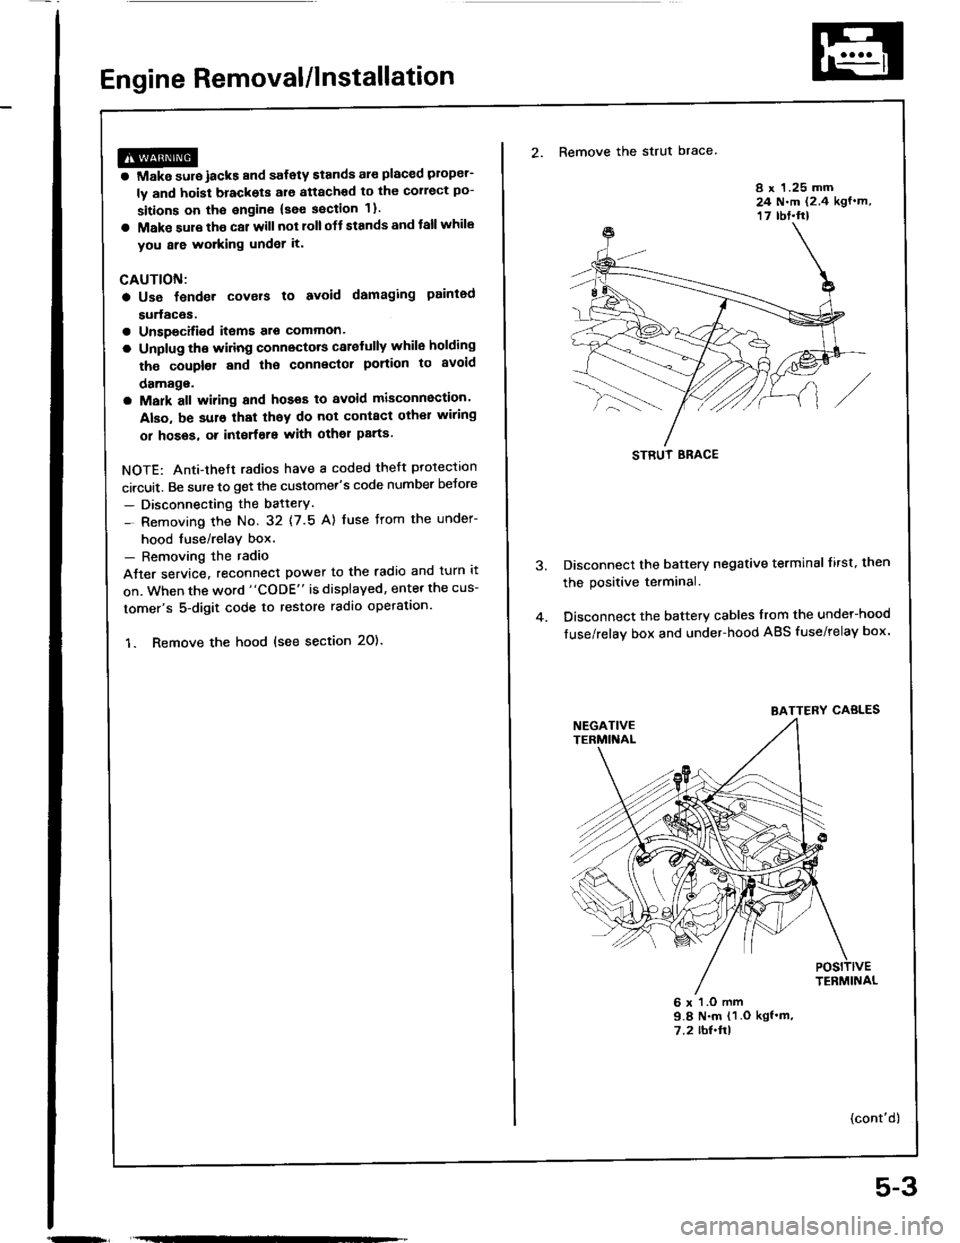 HONDA INTEGRA 1994 4.G Workshop Manual Engine Removal/lnstallation
@a Make sure jacks and safety stands aro placed ploper-
ly and hoisl brackots arg attachod to the correct po-
sitions on tho engine (se€ ssction 1).
a Mak€ sure tho car